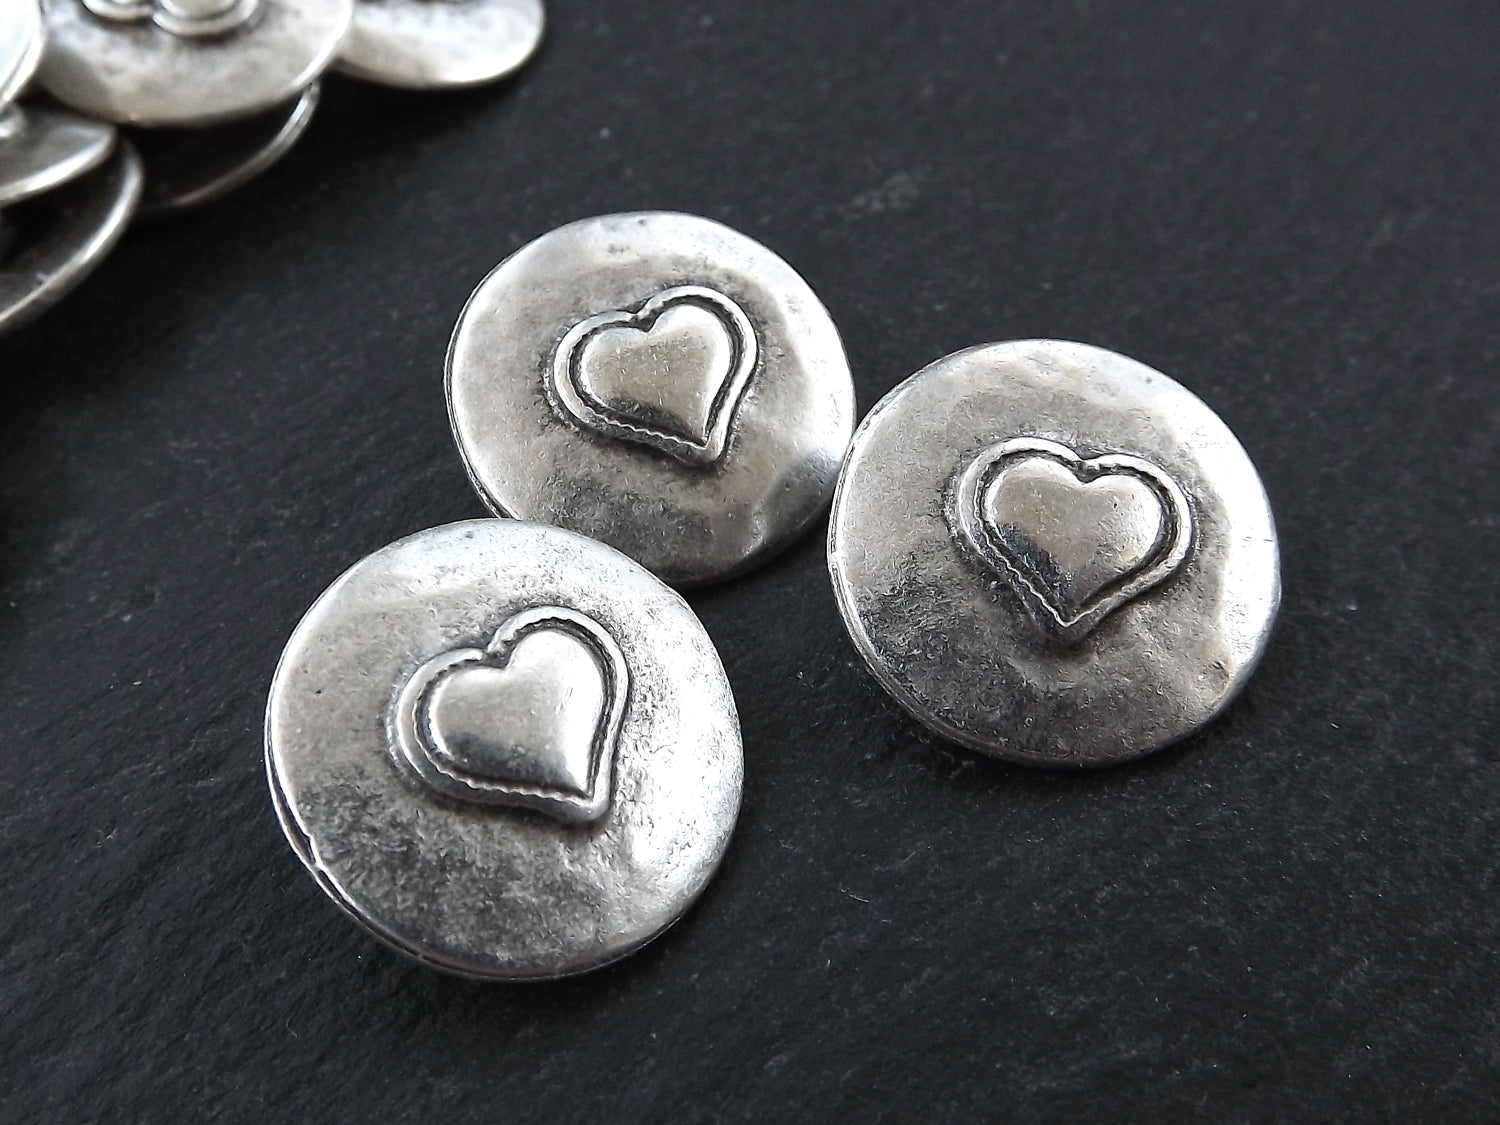 3 Rustic Metal Heart Buttons Matte Antique Silver Plated - Round